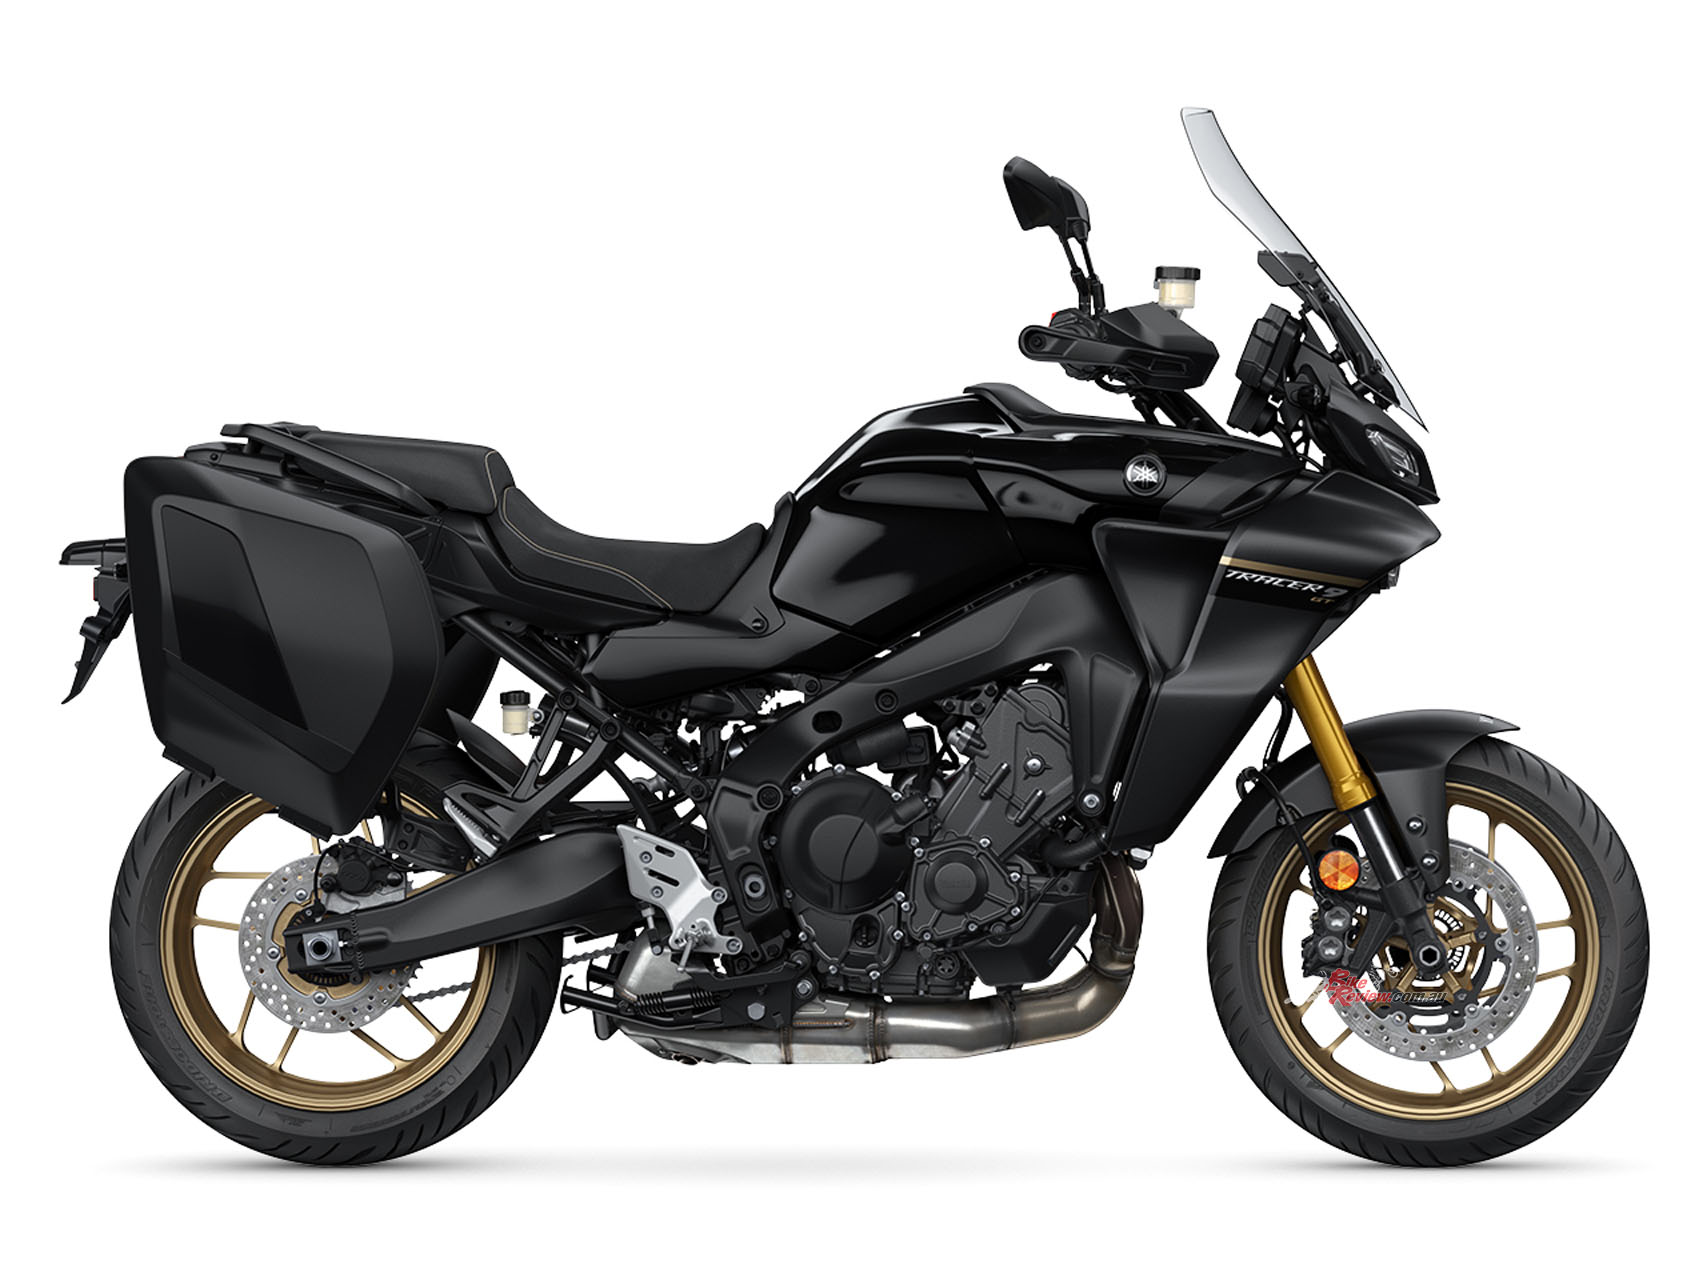 Yamaha say that the Tracer 9 GT continues with the specification that offers the highest level of touring comfort for 2023.